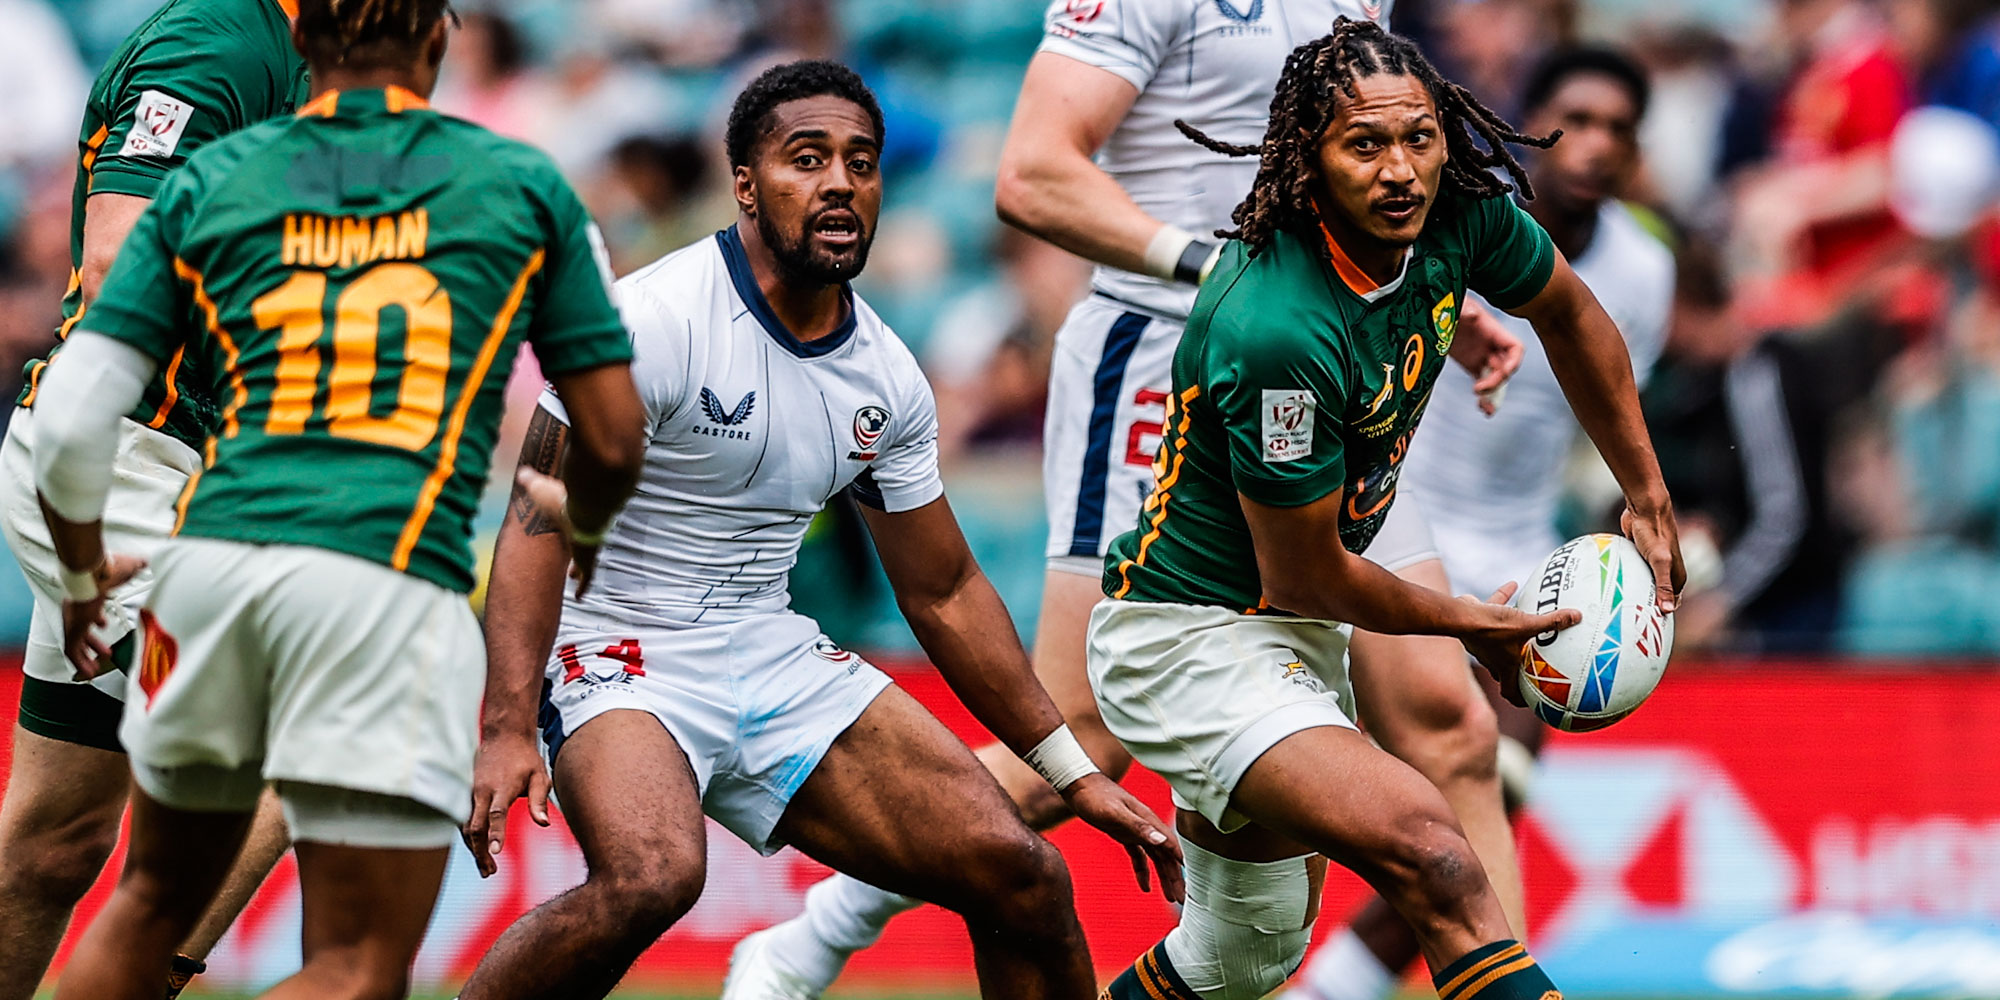 Justin Geduld scored one of the Blitzboks' seven tries against the USA on Sunday.